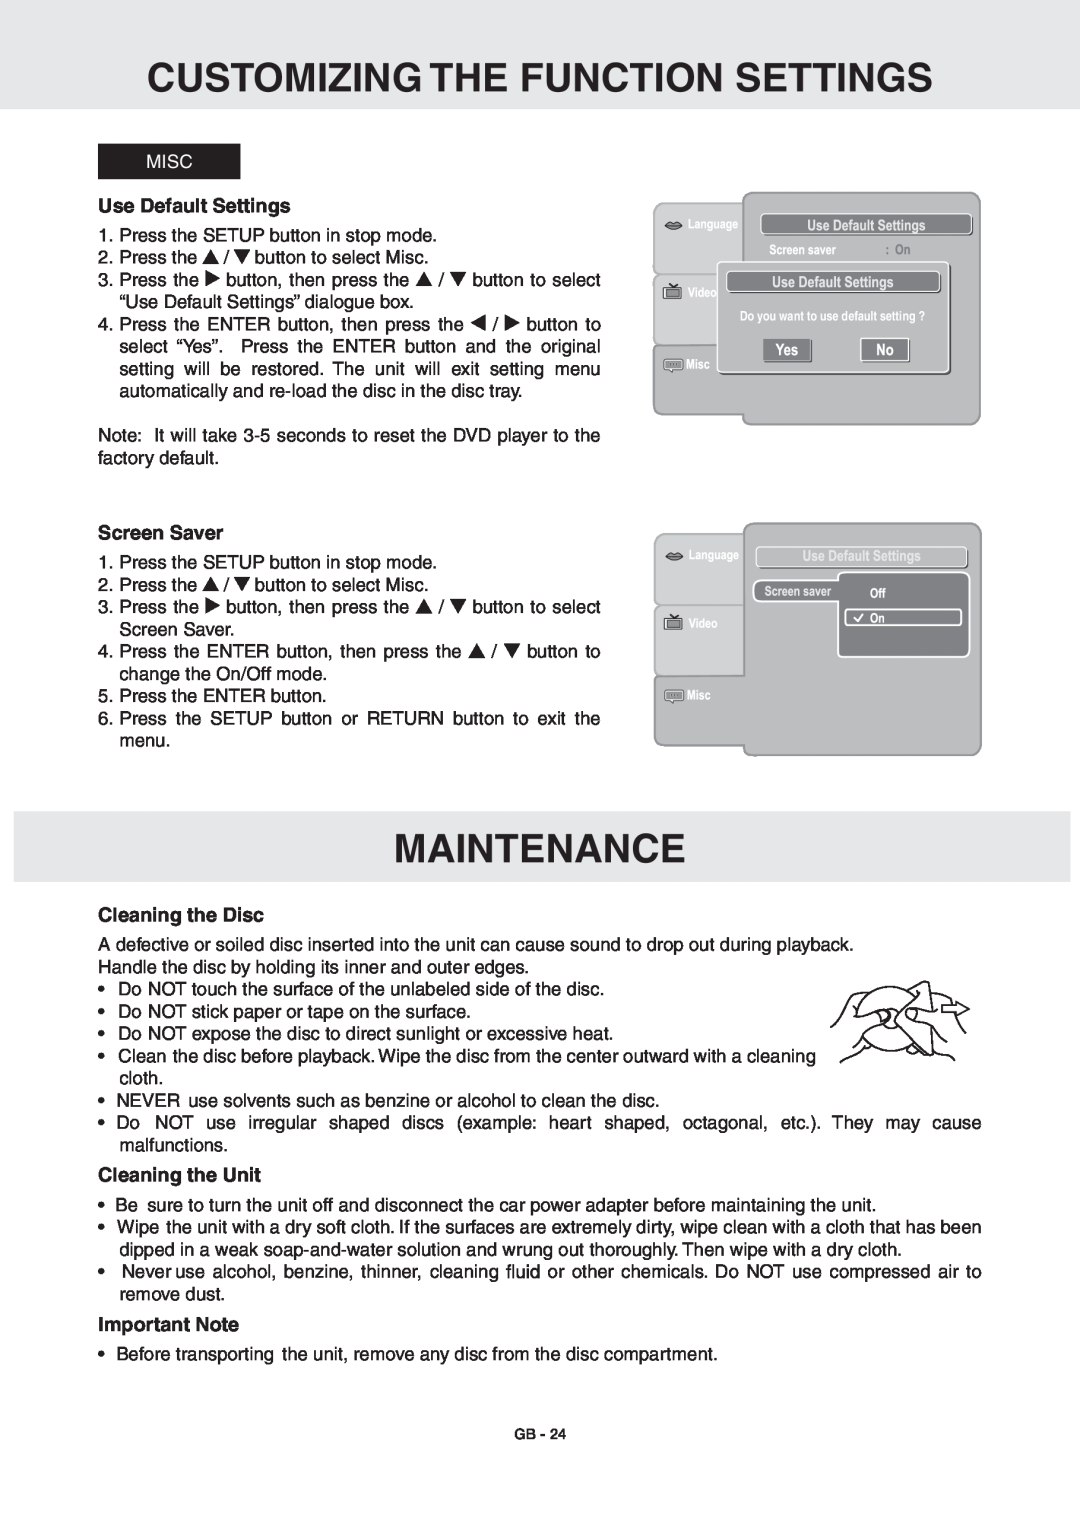 RCA DRC6389T Maintenance, Use Default Settings, Screen Saver, Cleaning the Disc, Cleaning the Unit, Important Note, Misc 